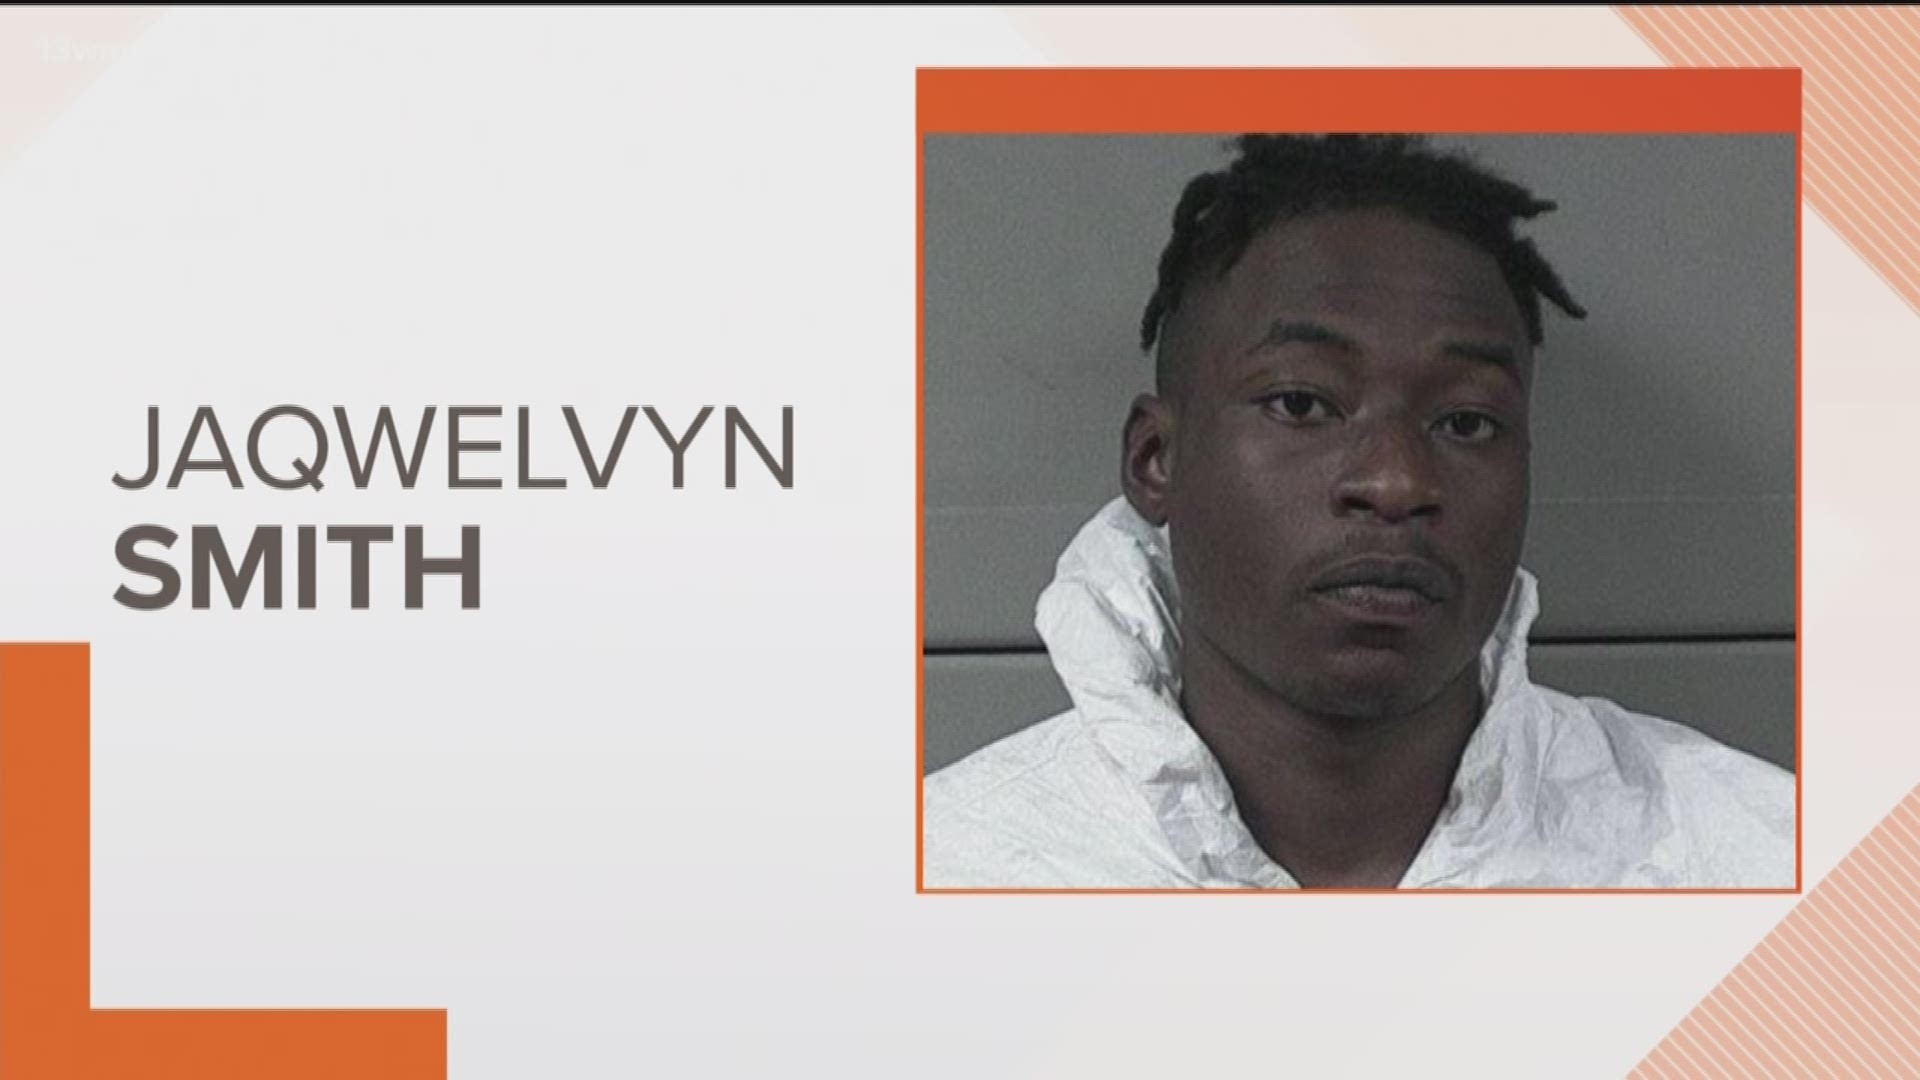 A Byron teen now faces murder charges after a man he allegedly shot on Easter has died from his injuries